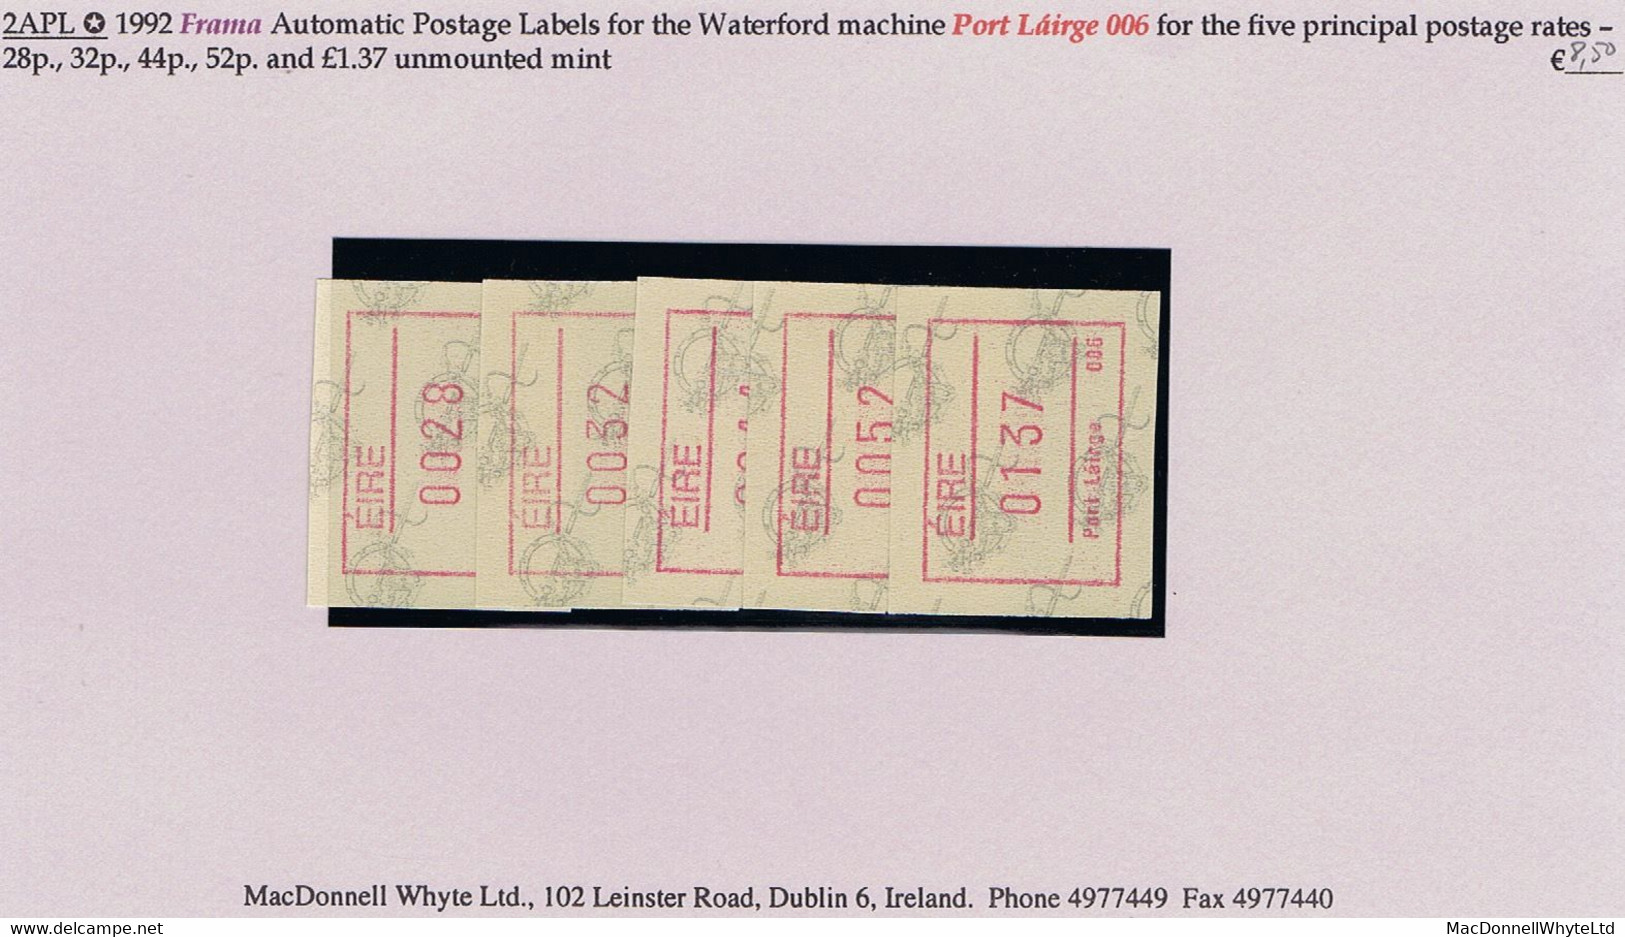 Ireland 1992 Frama Automatic Postage Labels For Waterford 006 Machine For Five Rates 28p, 32p, 44p, 52p, £1.37 Mint - Automatenmarken (Frama)